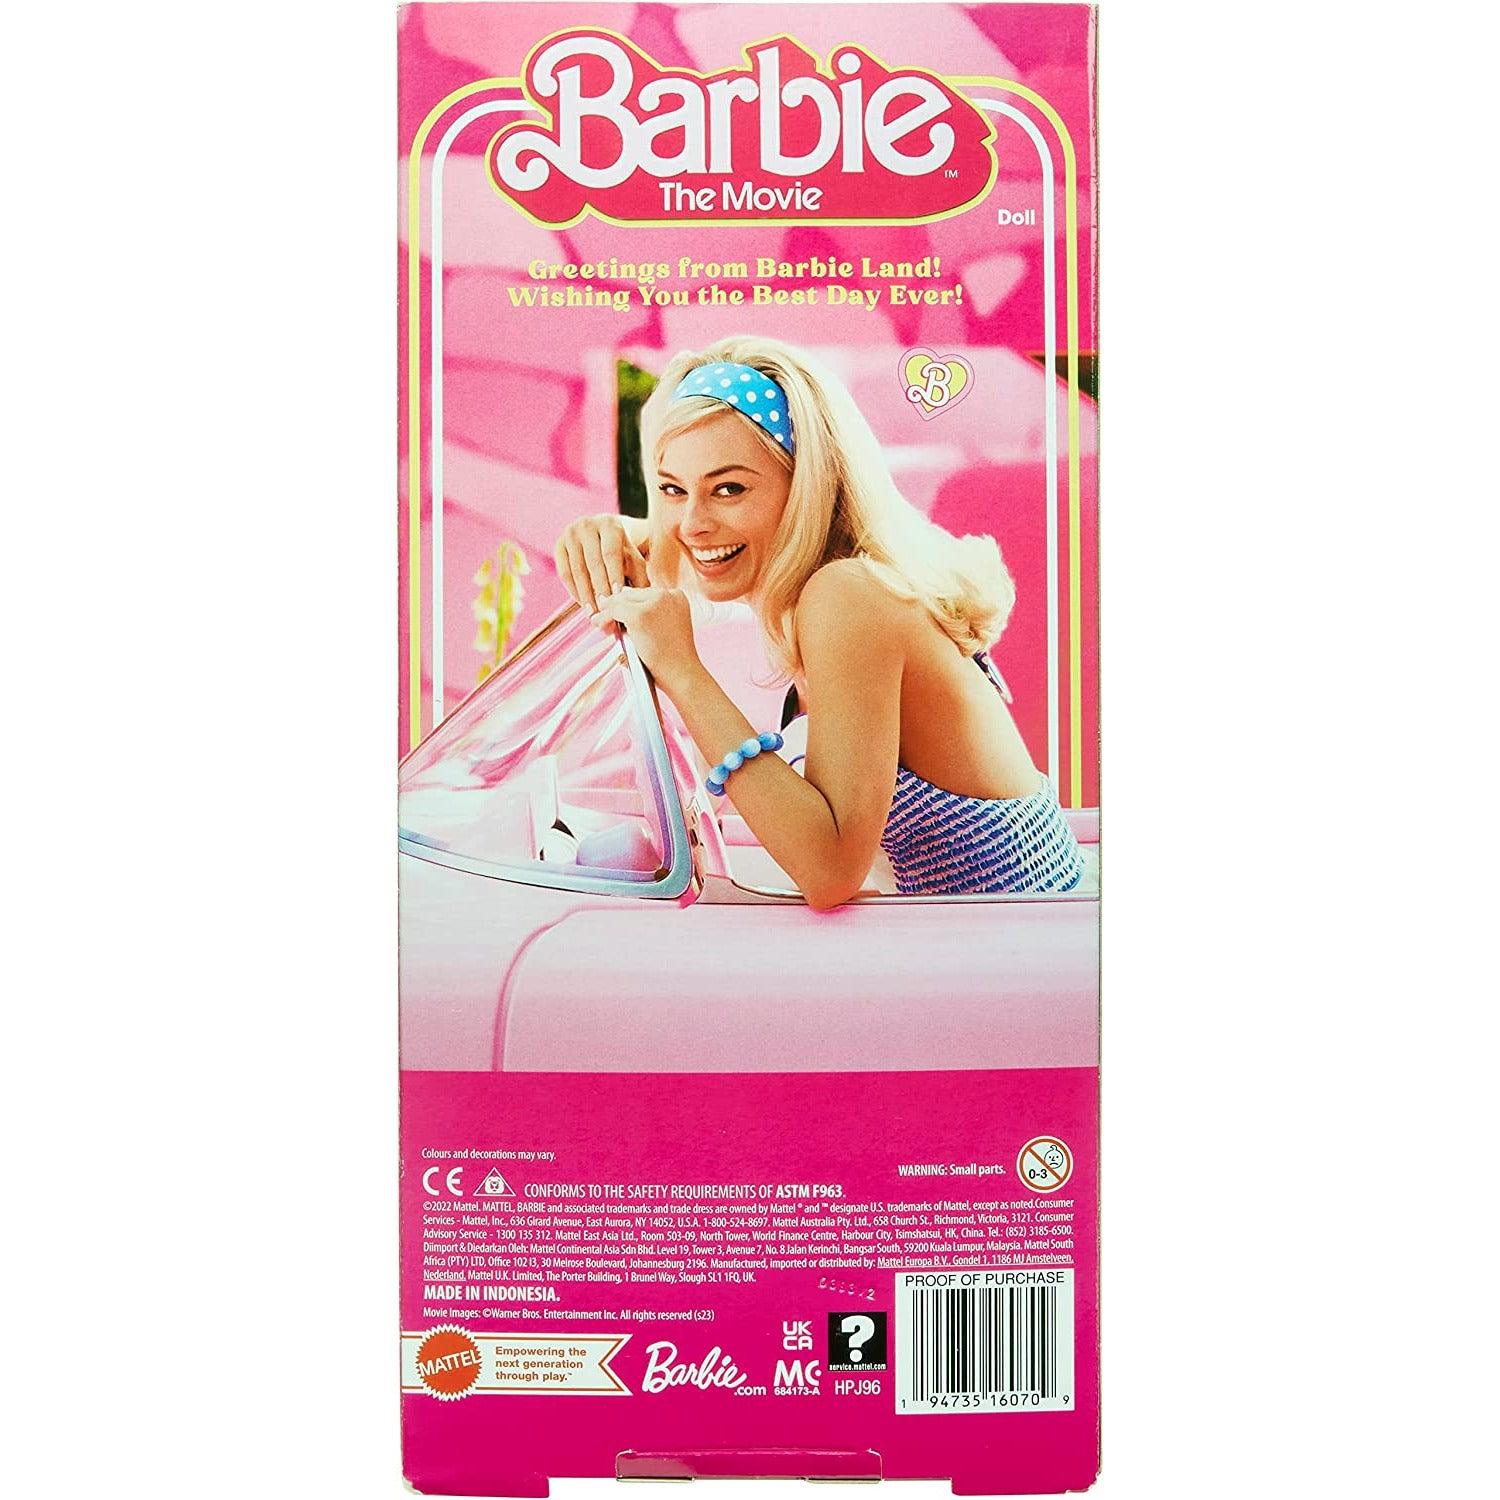 Barbie The Movie Doll, Collectible Doll Wearing Pink and White Gingham Dress with Daisy Chain Necklace - BumbleToys - 5-7 Years, Barbie, Boys, Disney Princess, dup-review-publication, Fashion Dolls & Accessories, Girls, Mattel